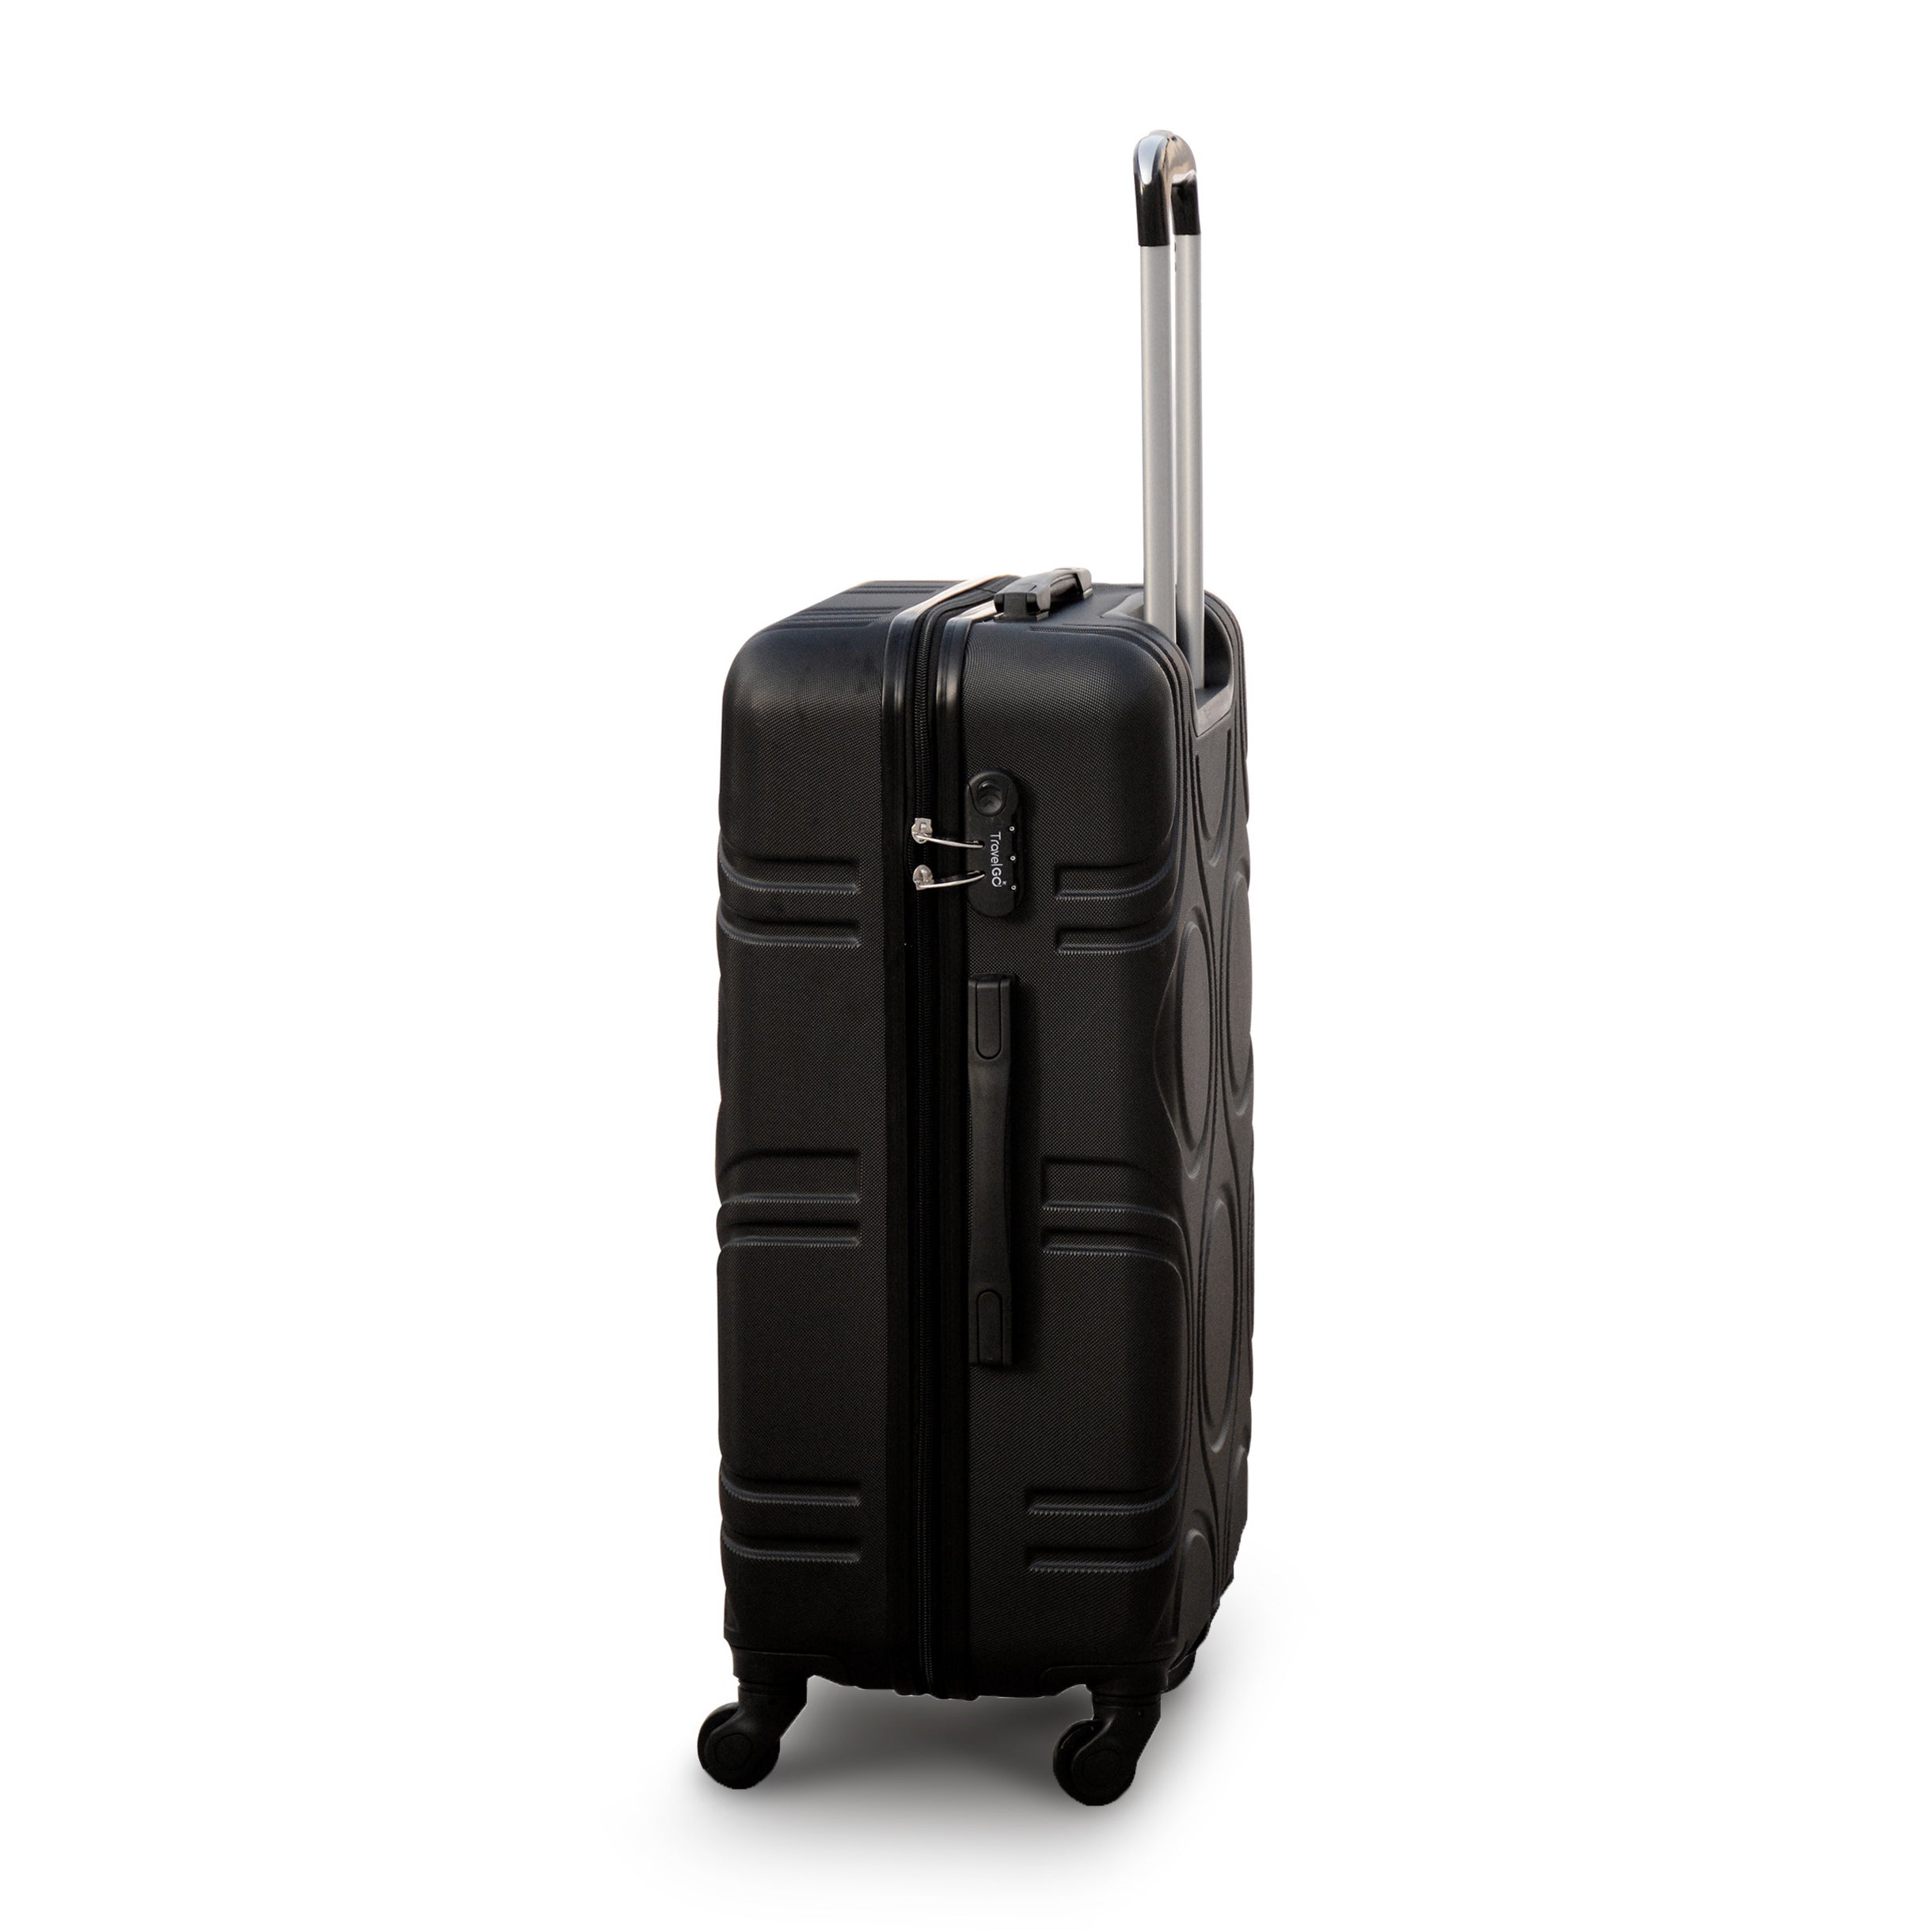 Lightweight ABS Luggage | Hard Case Trolley Bag | 3 Pcs Set 20” 24” 28 Inches | 2 Years Warranty | Yinton 2208 Black